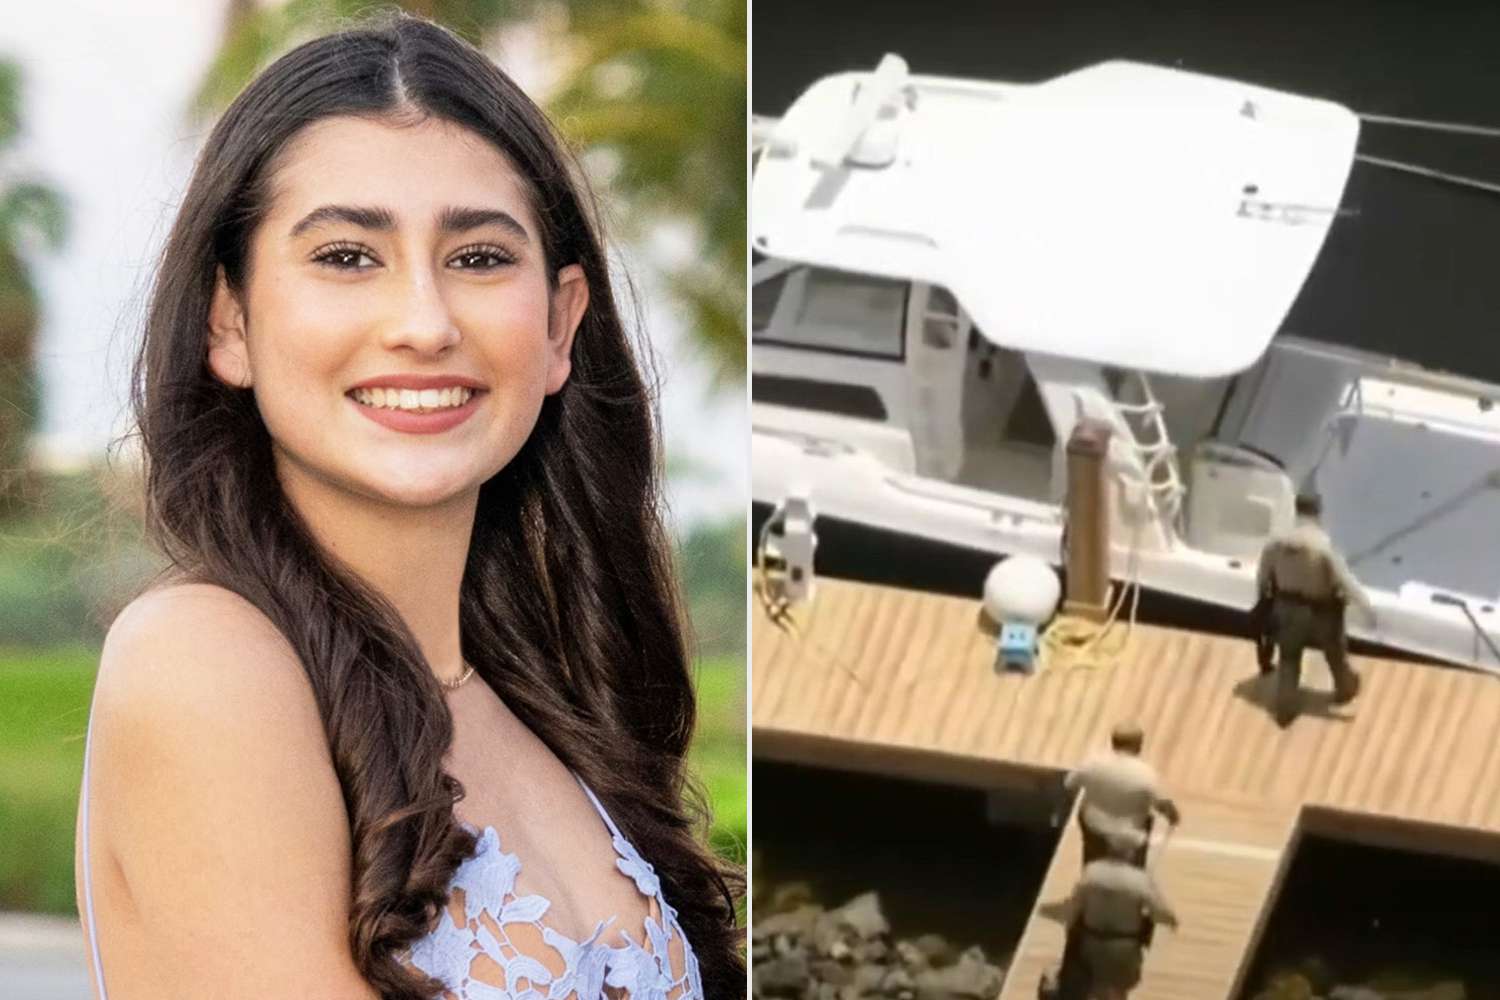 Man Who Owns Boat that Killed Teen Wakeboarder Ella Adler Had 'No Idea' About Crash: Lawyer